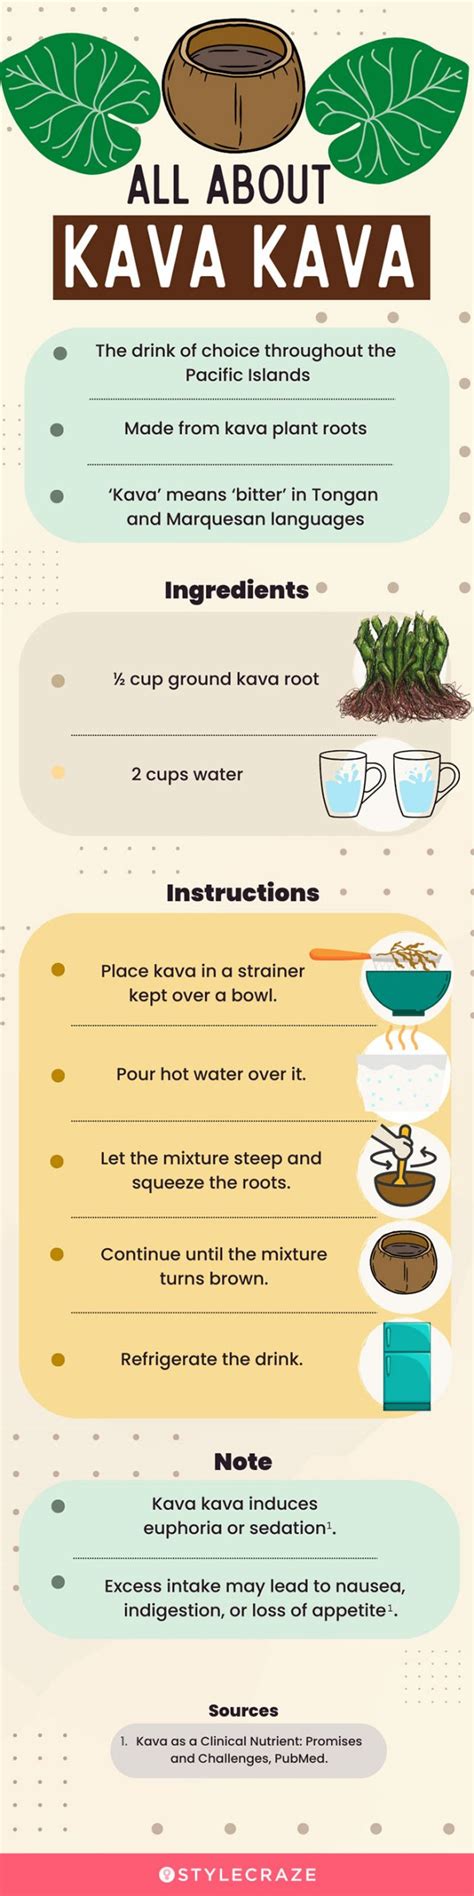 14 Impressive Benefits Of Kava How To Take It And Side Effects